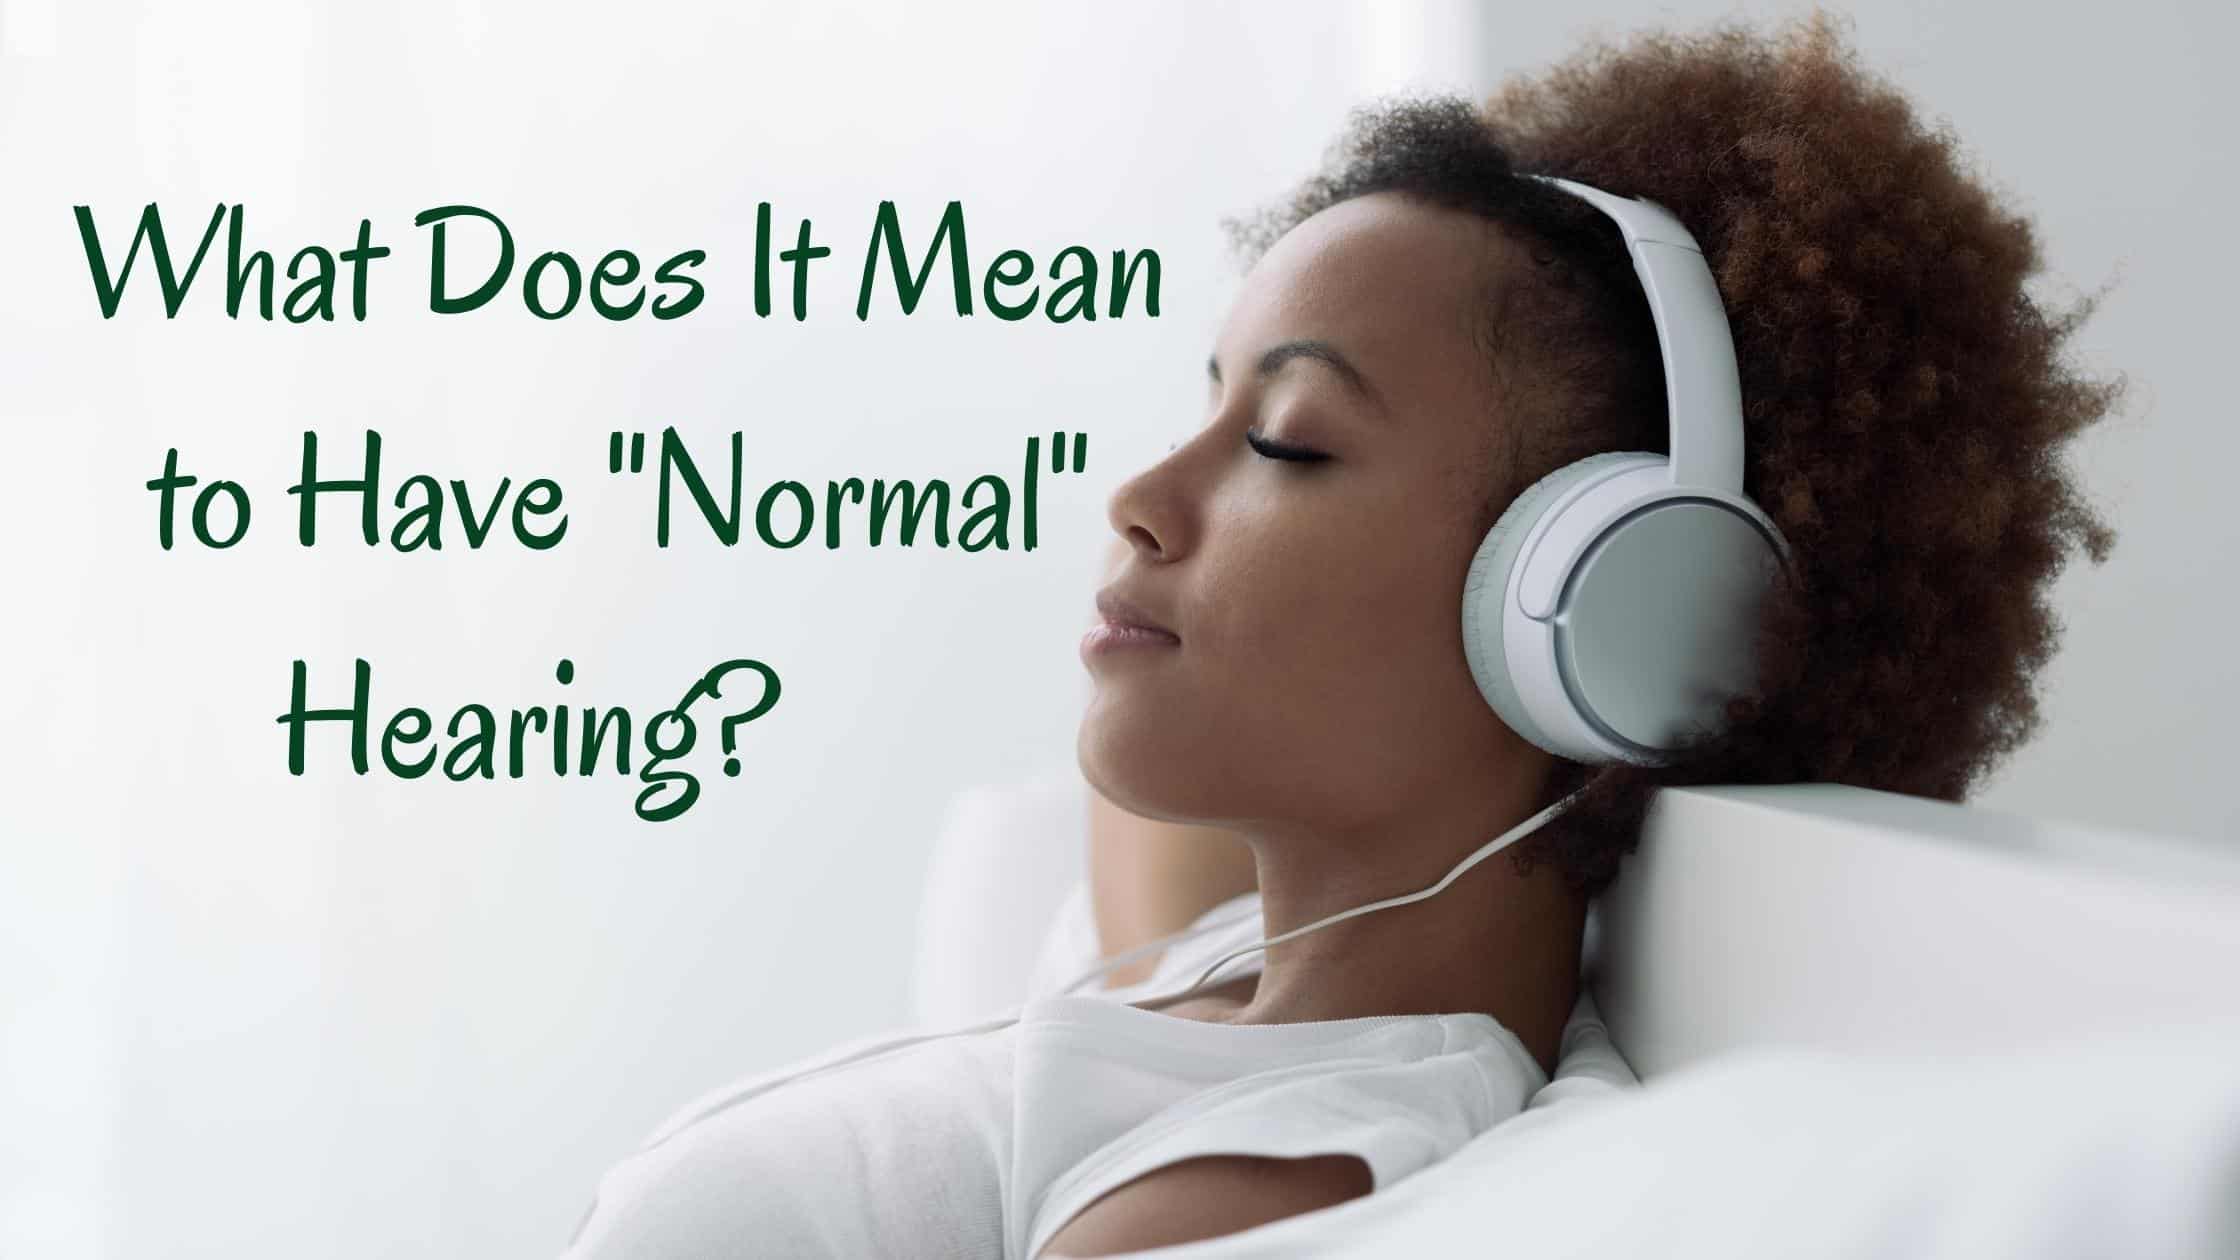 What Does It Mean to Have Normal Hearing